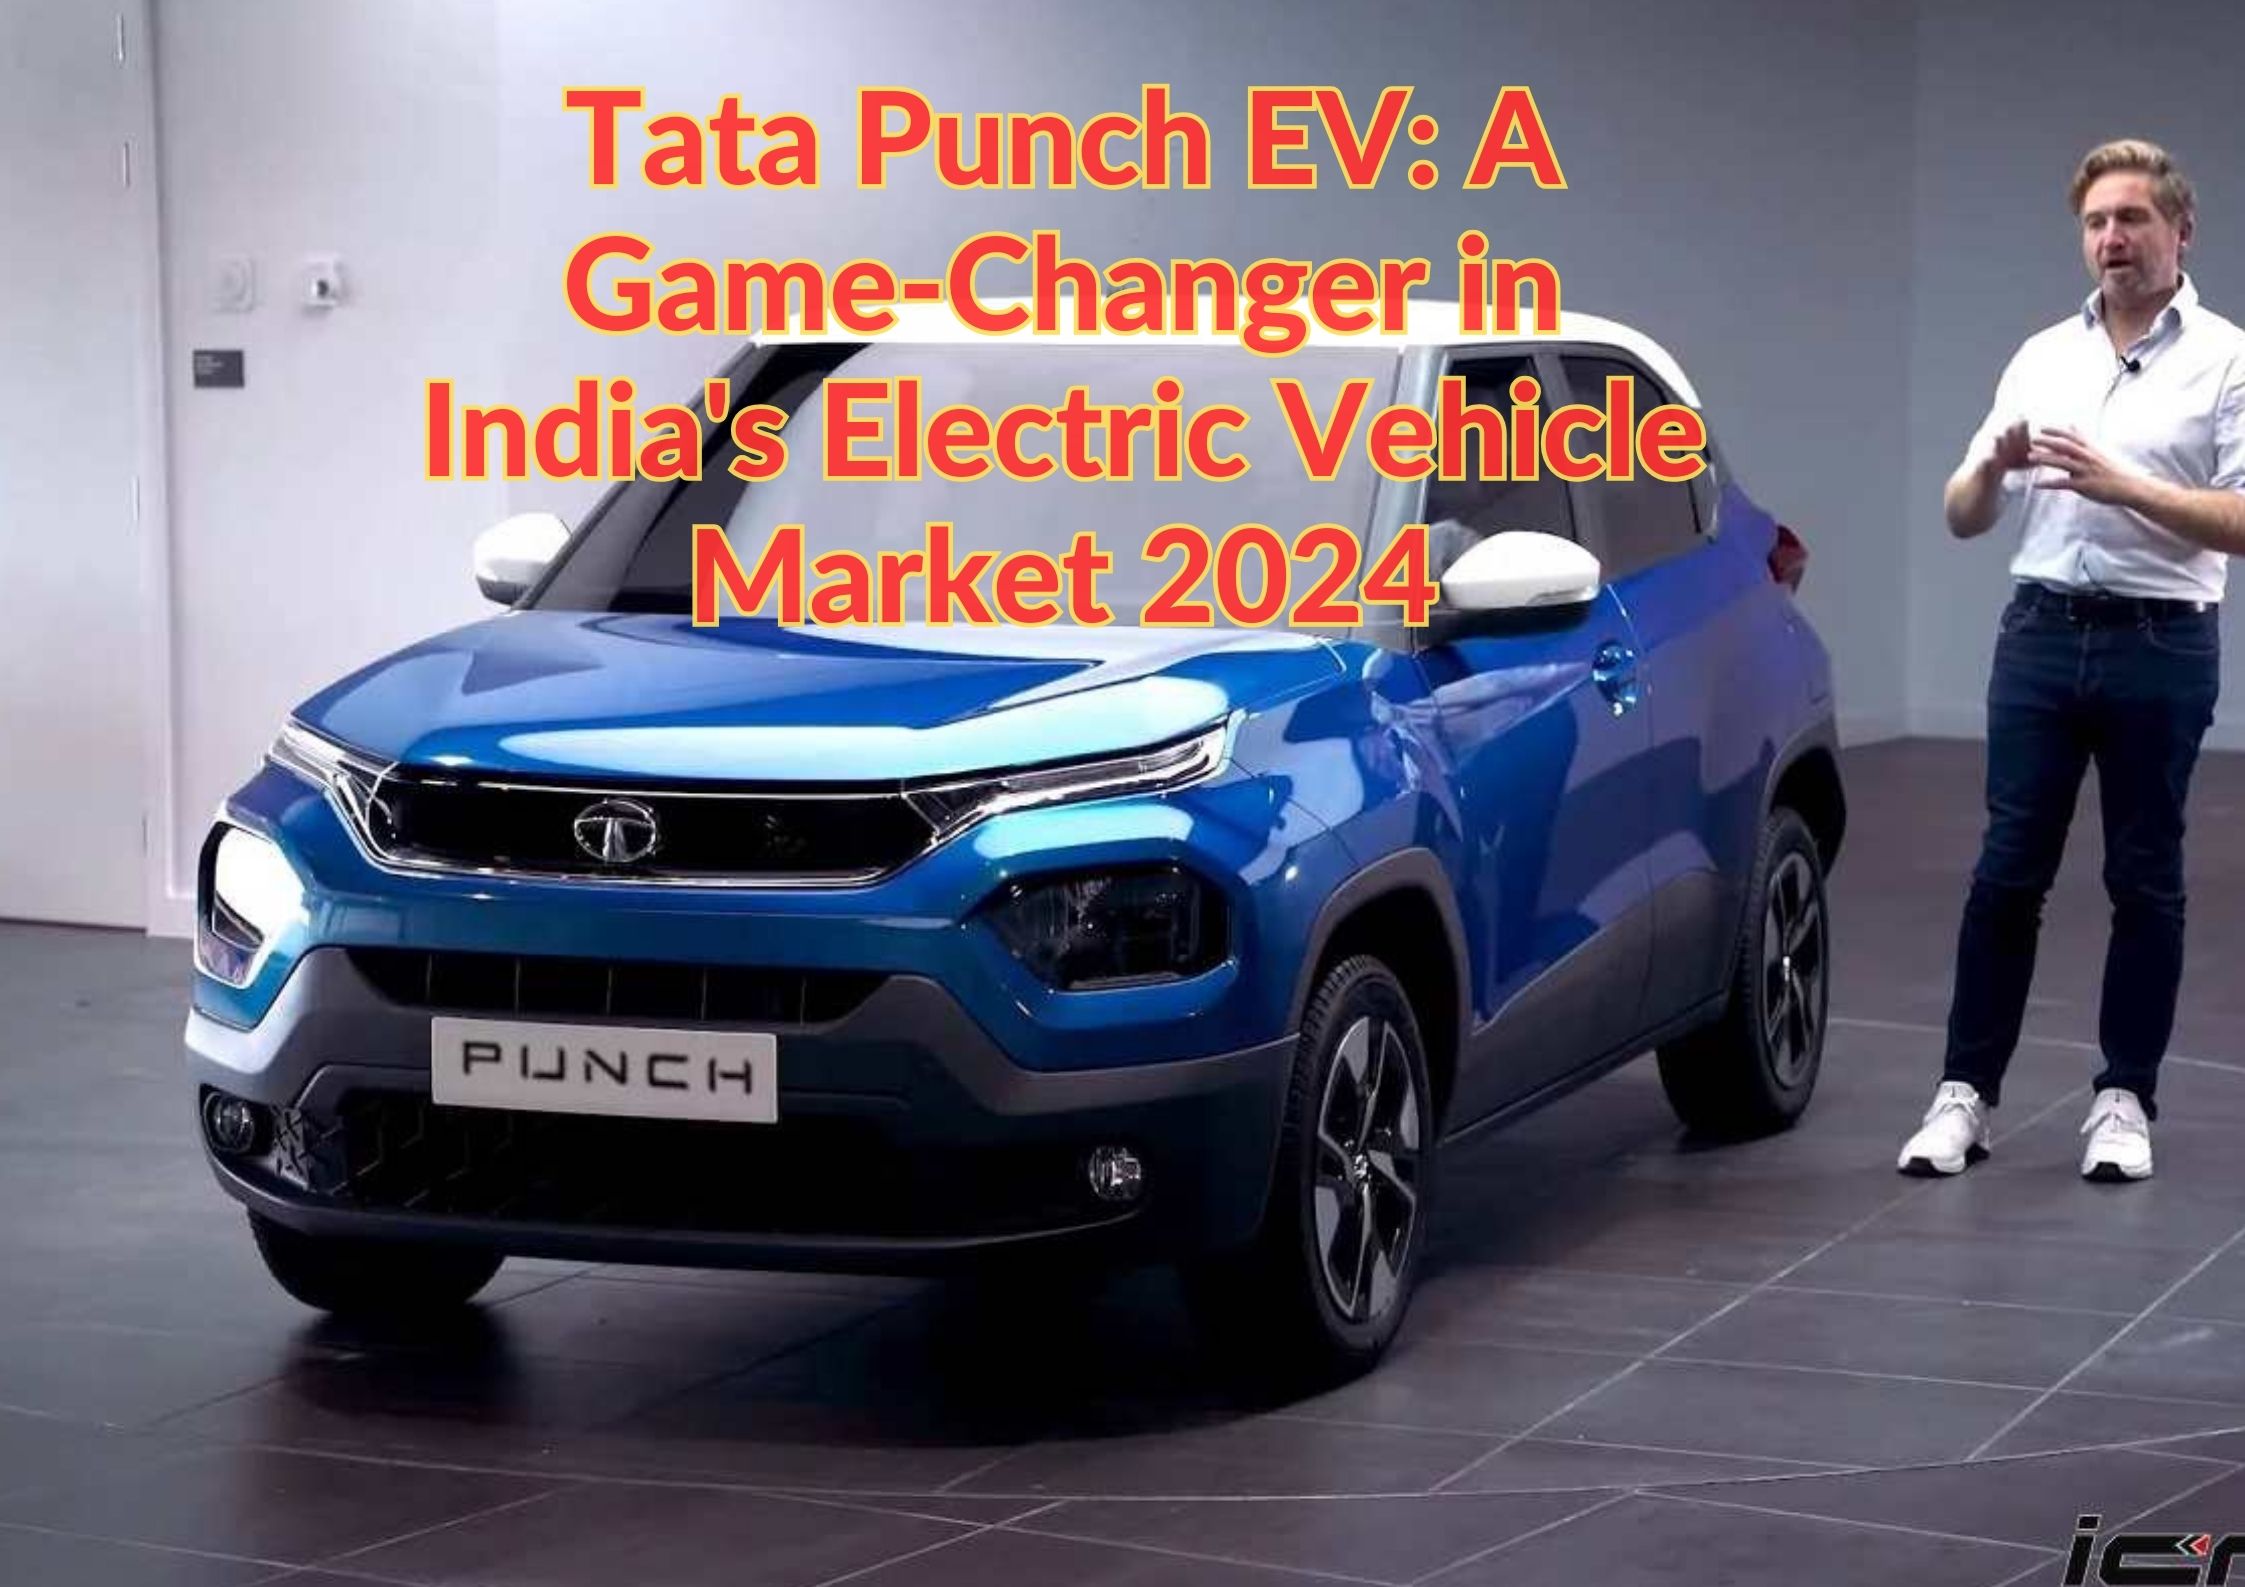 Tata Punch EV: A Game-Changer in India's Electric Vehicle Market 2024